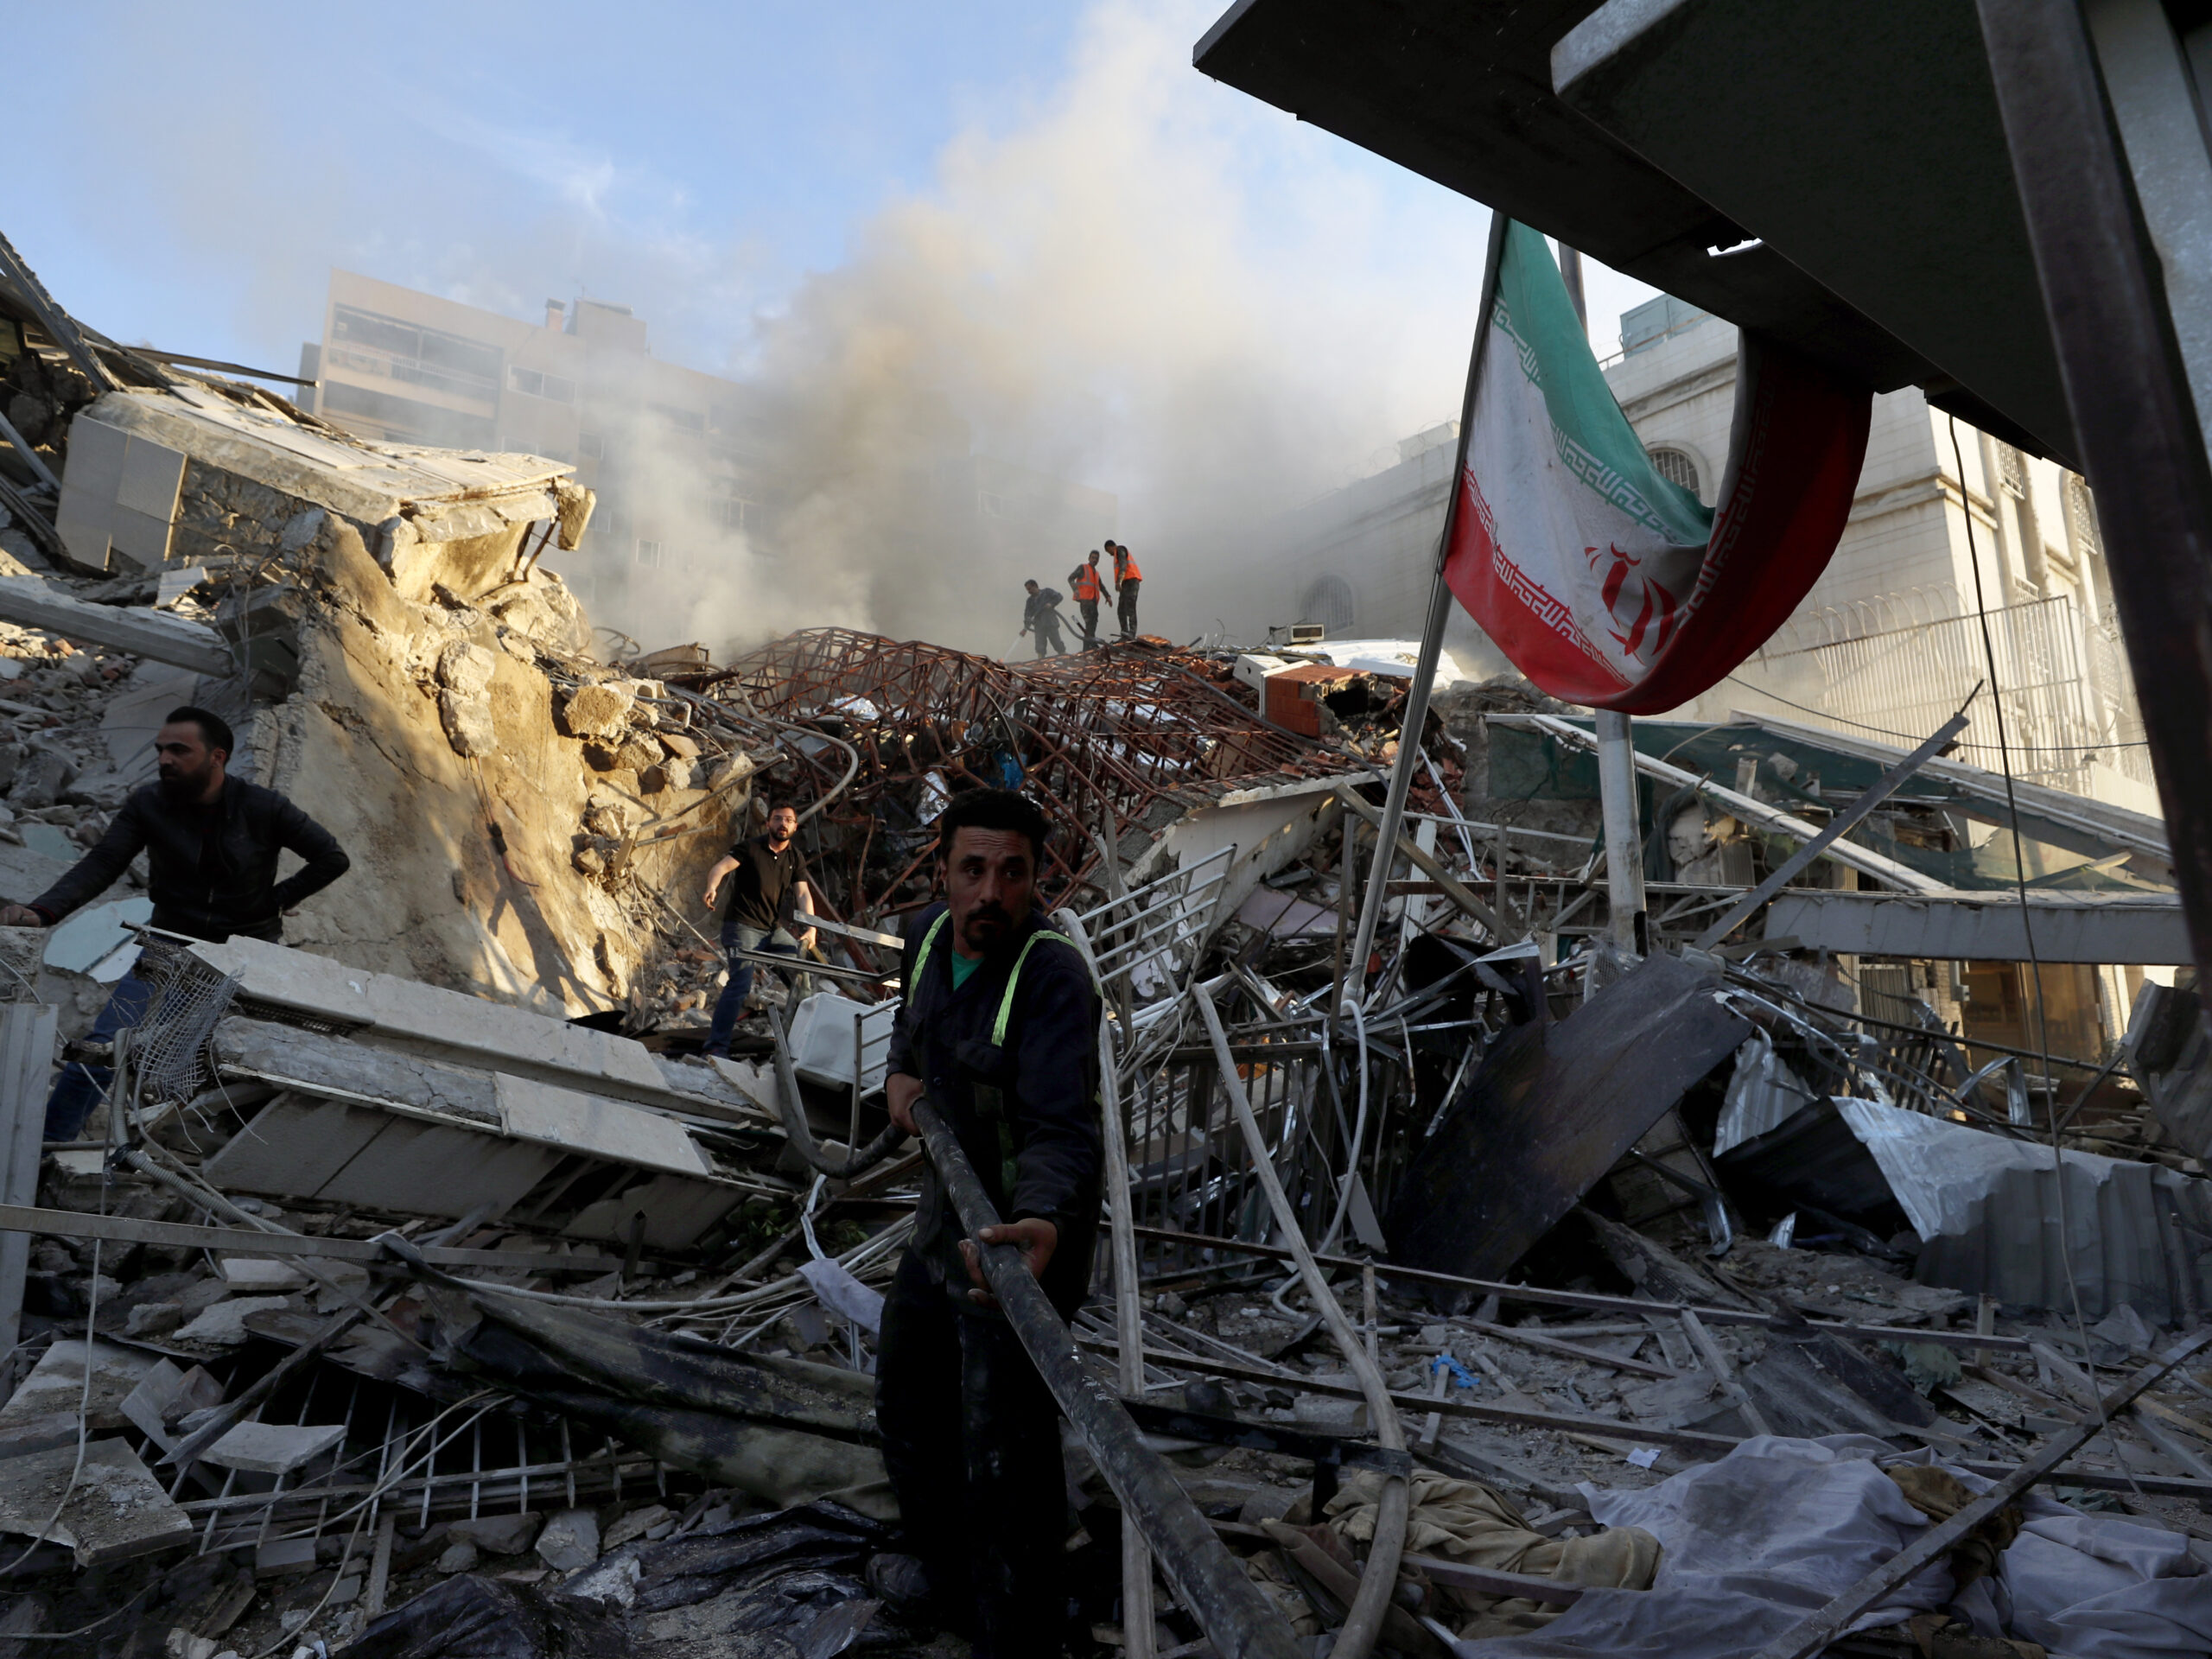 Emergency services work at a building hit by an air strike in Damascus, Syria, Monday.  Iran's consulate in Damascus was demolished and two Iranian generals were among those killed, Syrian and Iranian officials said.